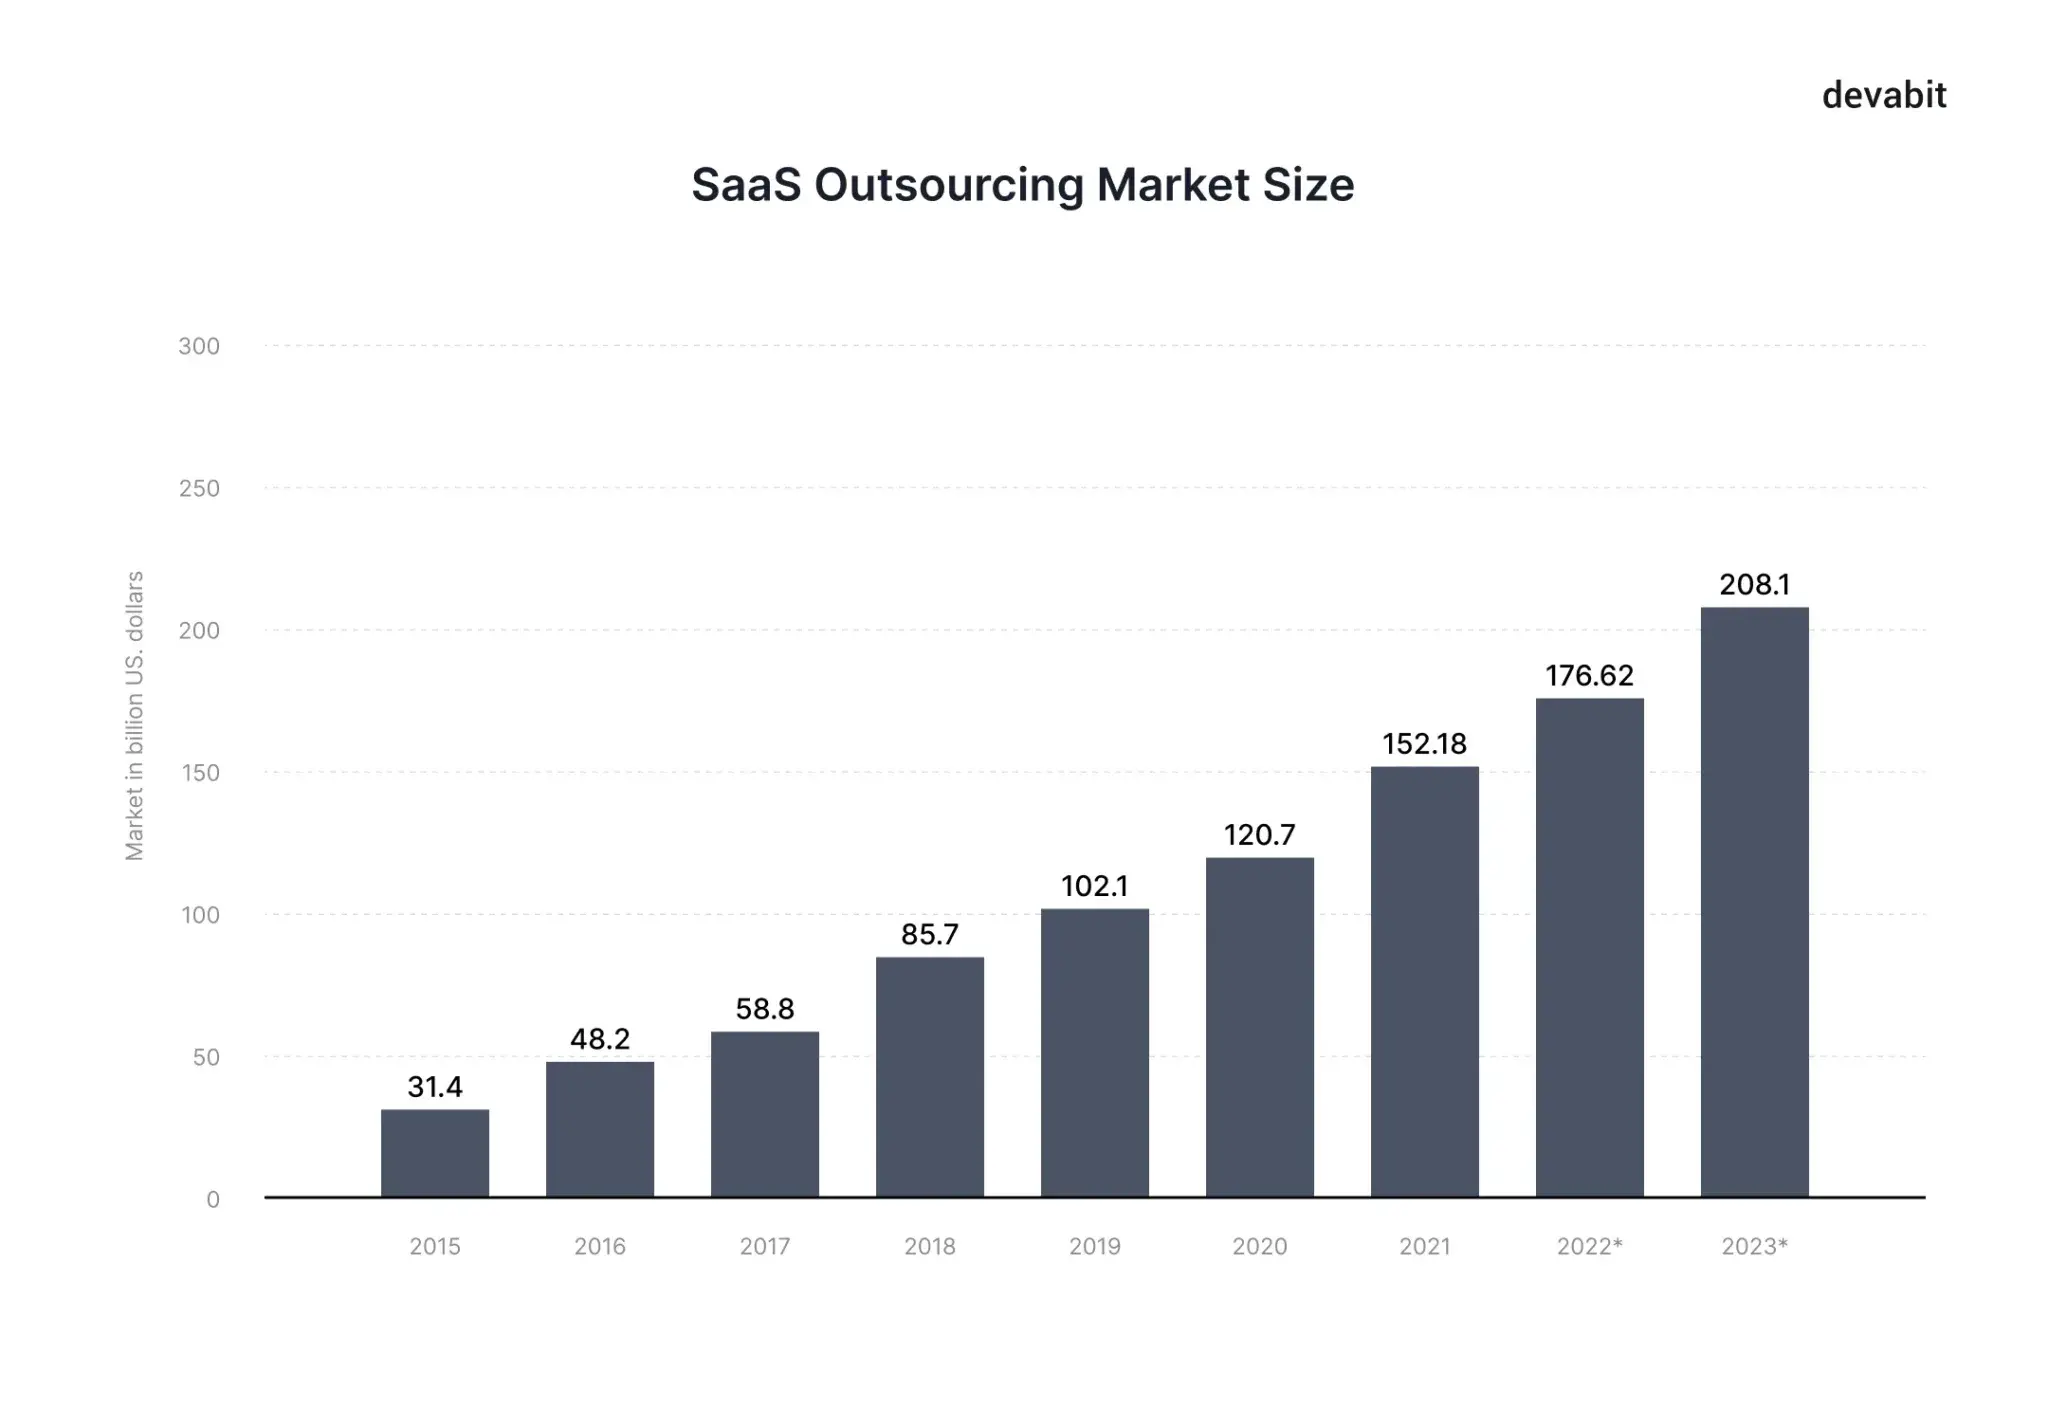 SaaS outsourcing market size